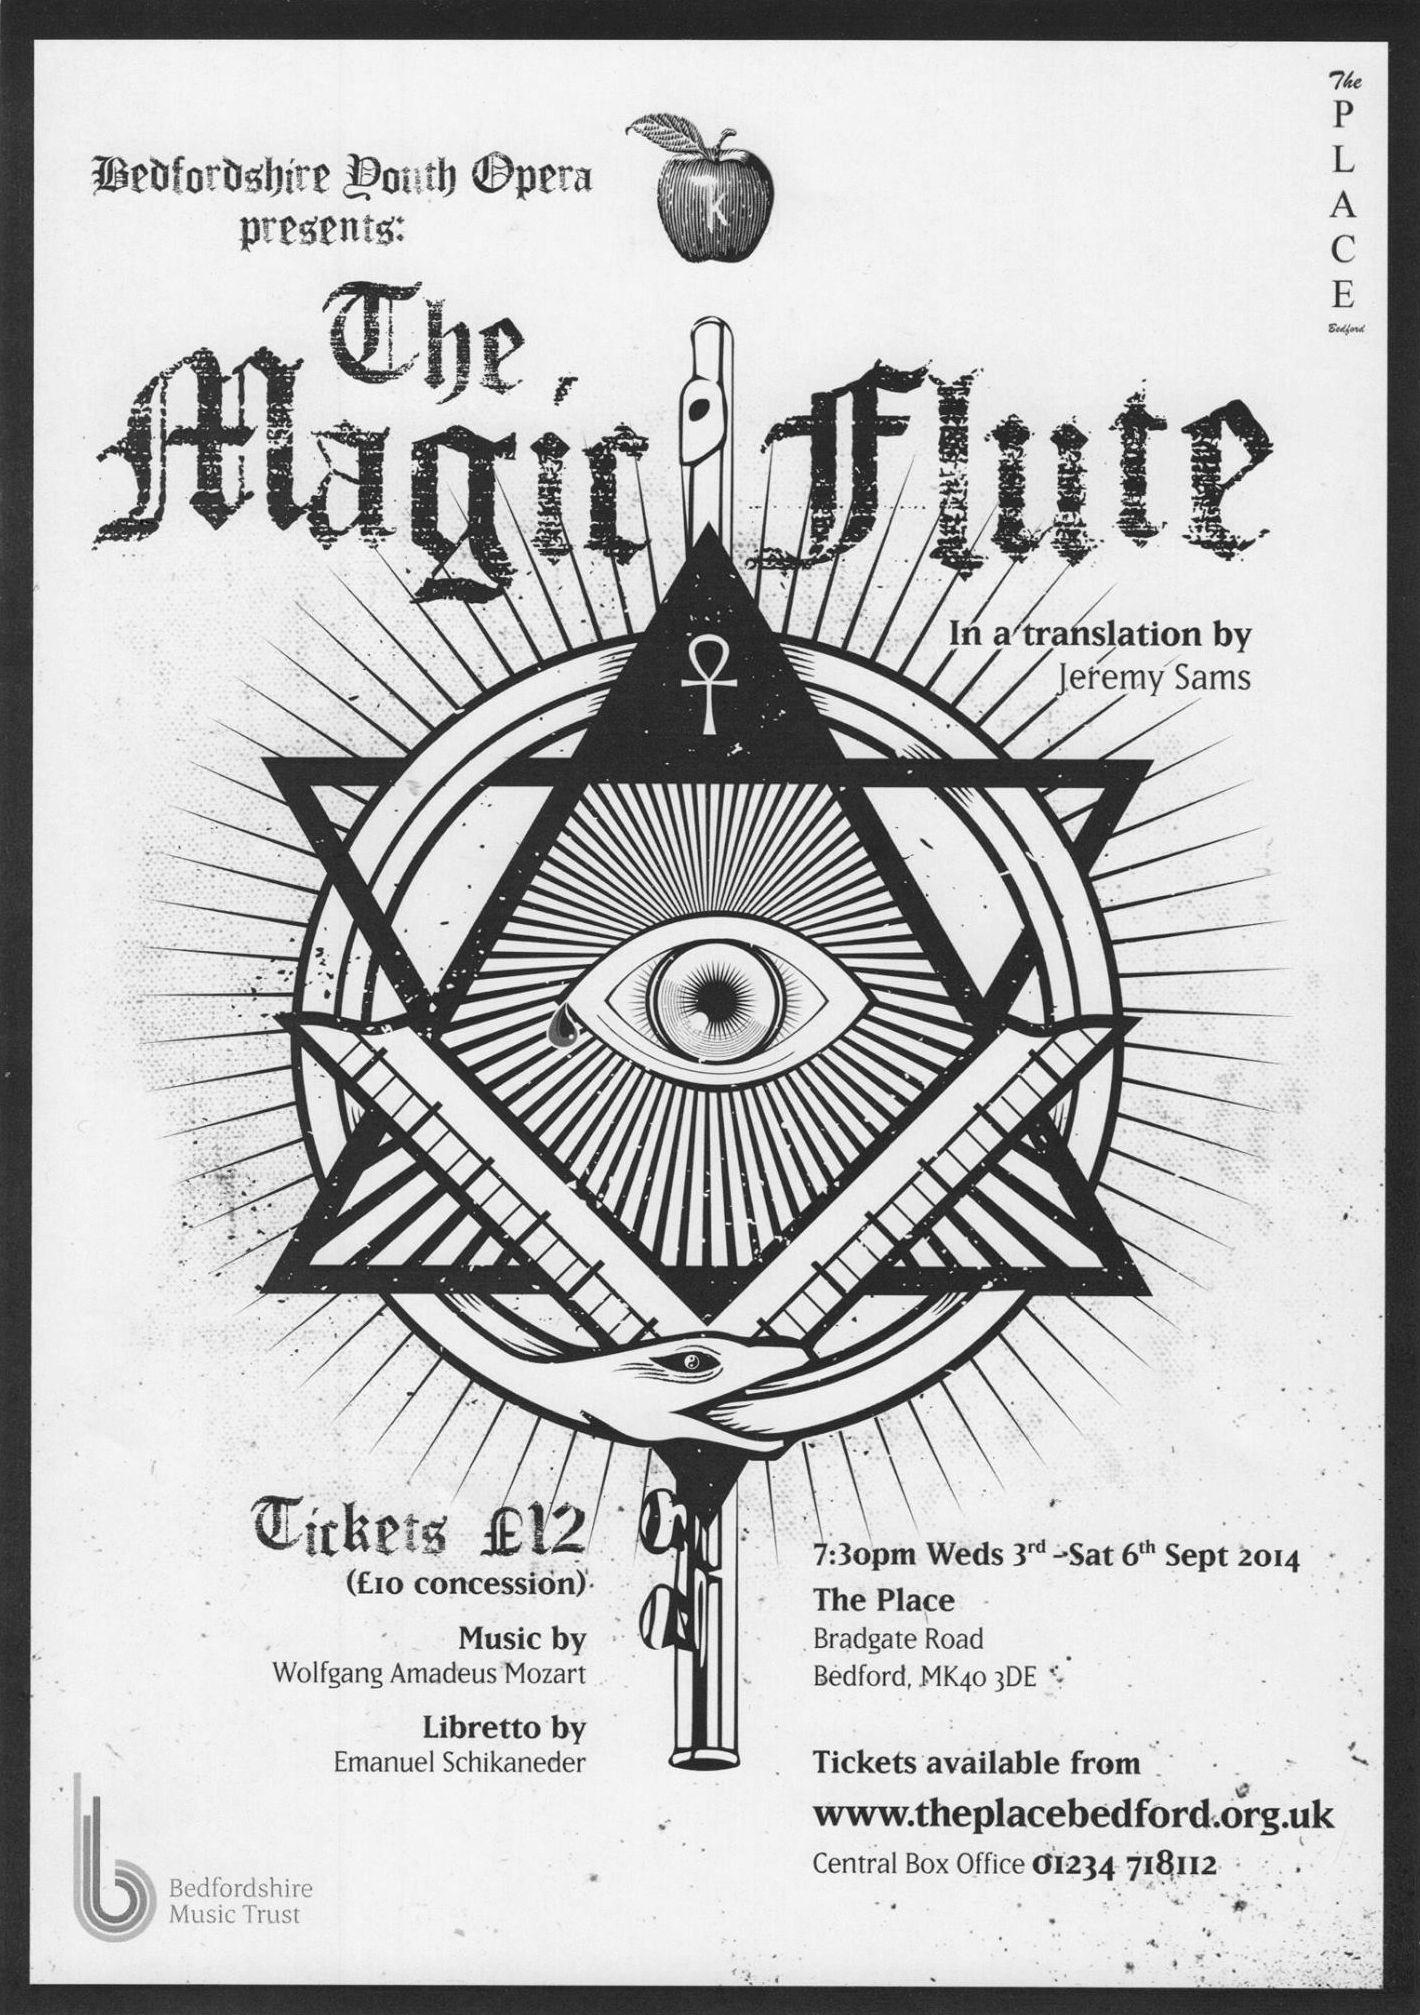 Bedfordshire Youth Opera presents The Magic Flute